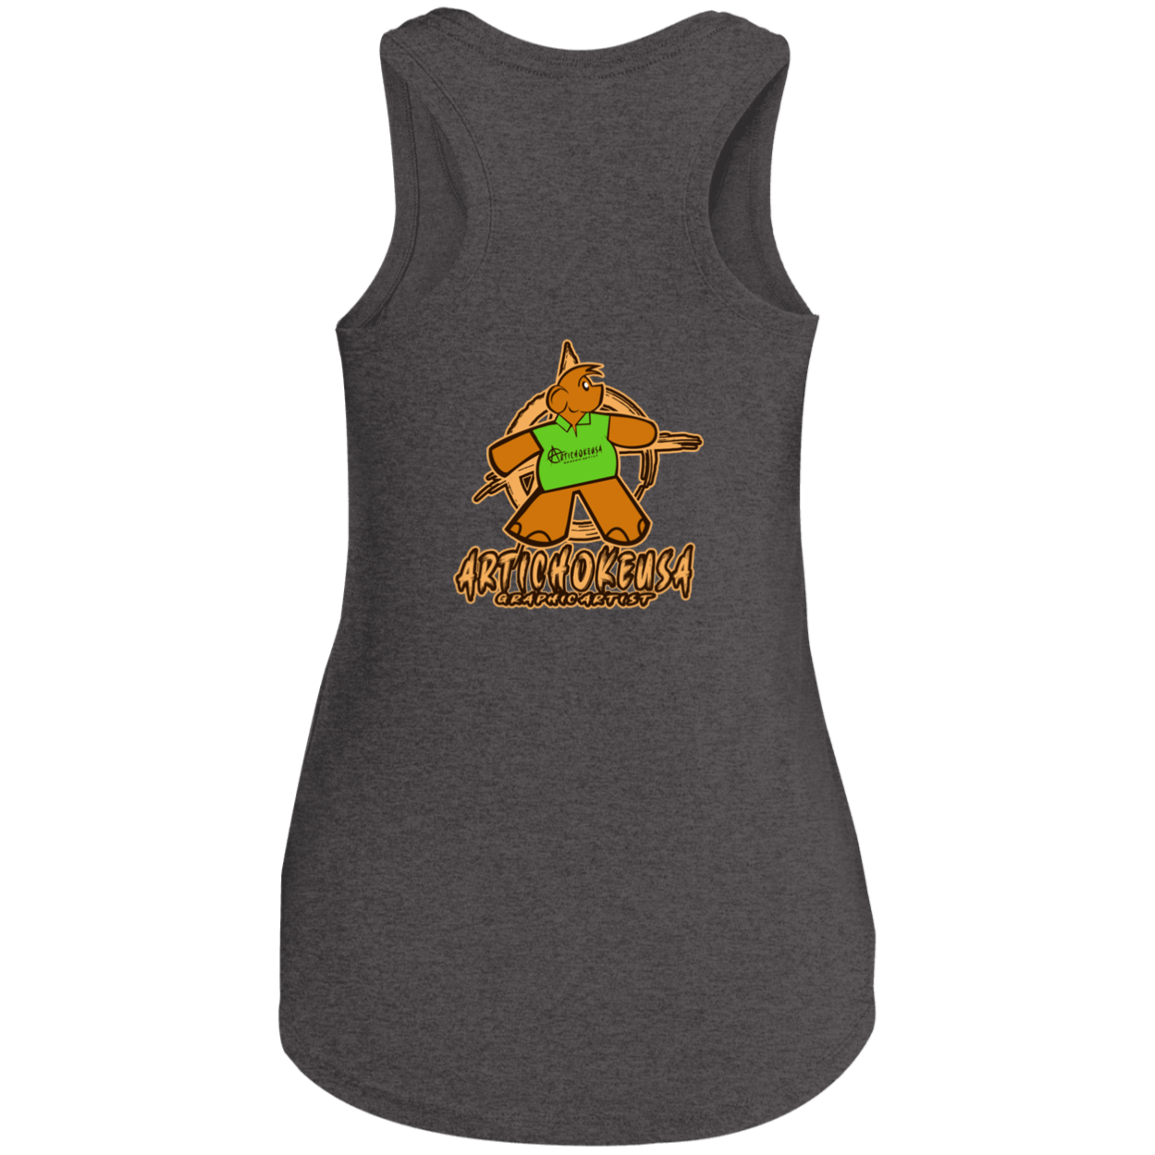 ArtichokeUSA Character and Font Design. Let’s Create Your Own Design Today. Winnie. Ladies' Tri Racerback Tank